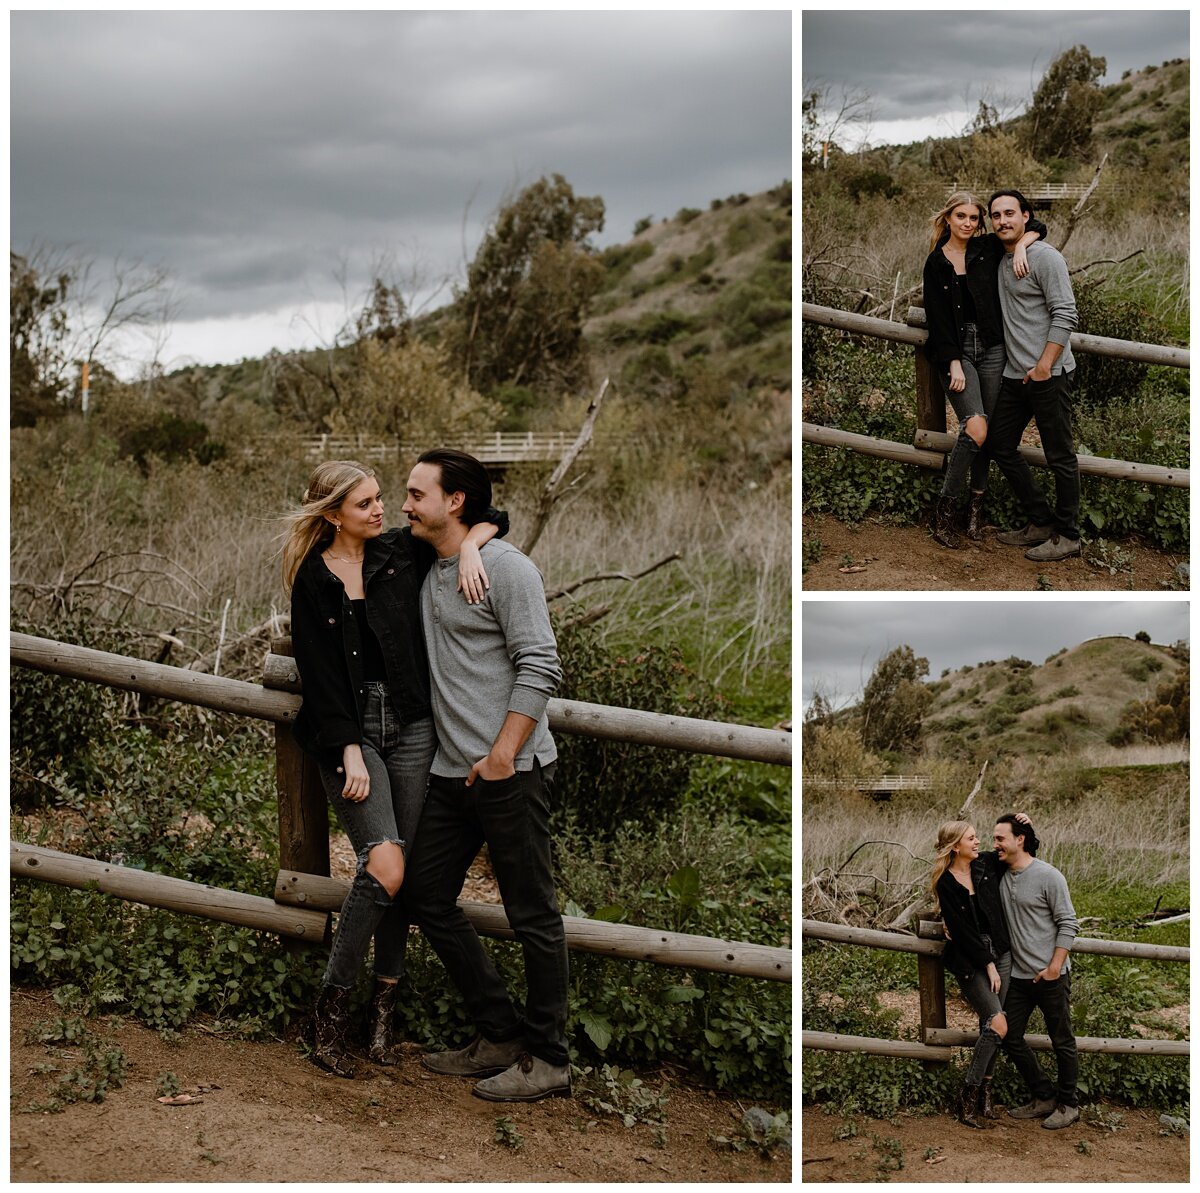 Carbon Canyon Park Orange County - Madeline and Scott Engagement Session - Eve Rox Photography-127_WEB.jpg